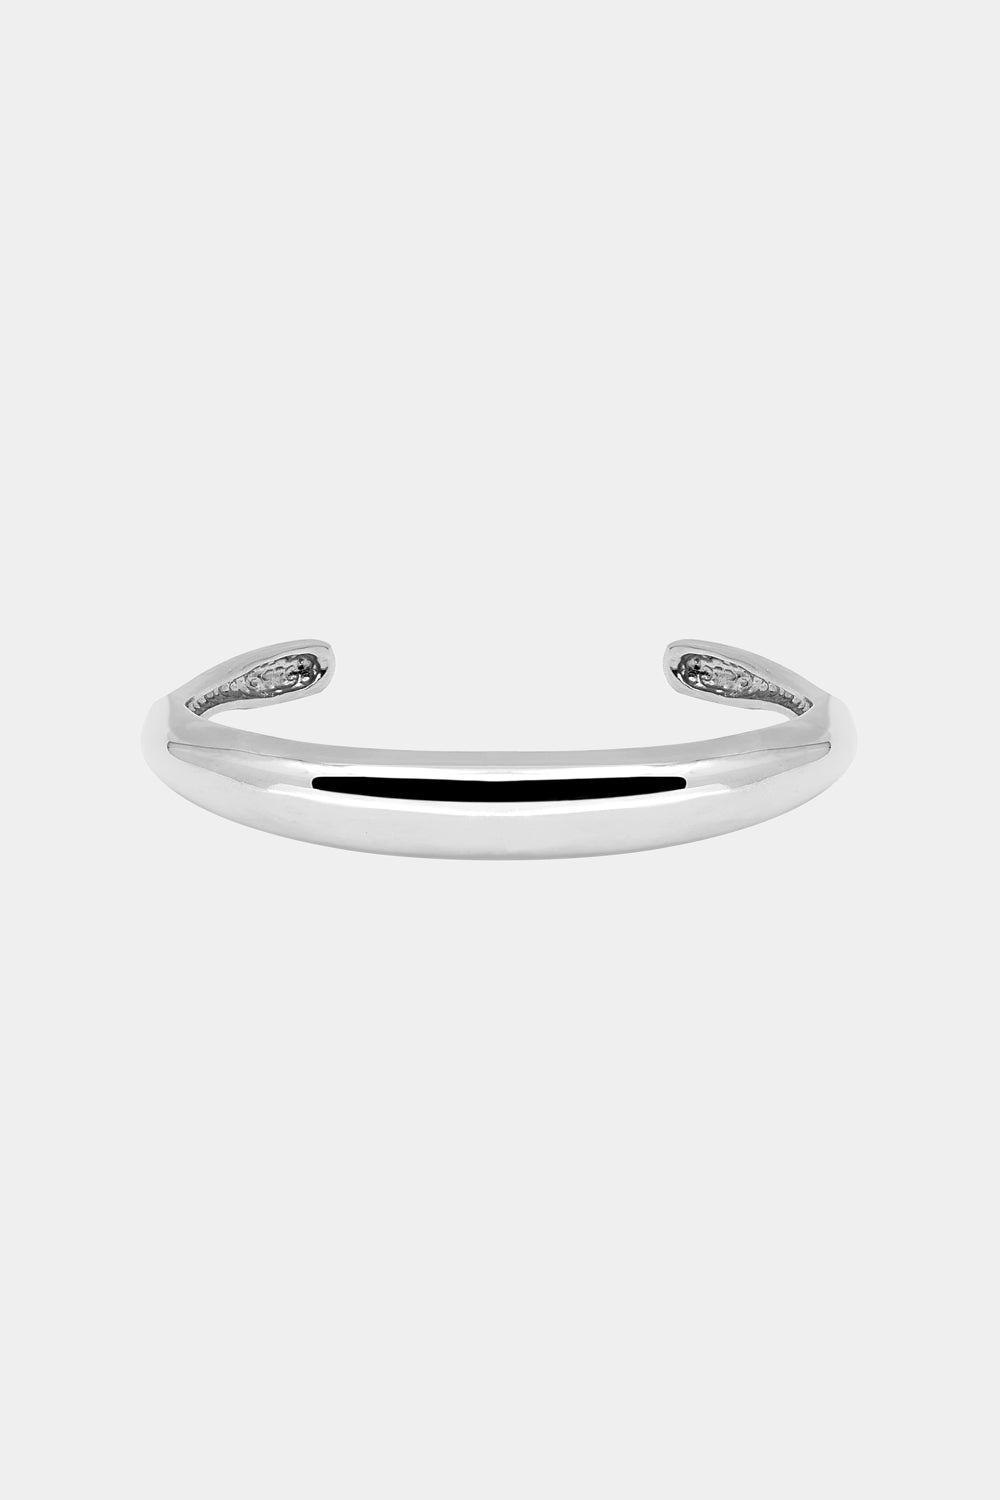 Blob Cuff | Silver or White Gold, More options available